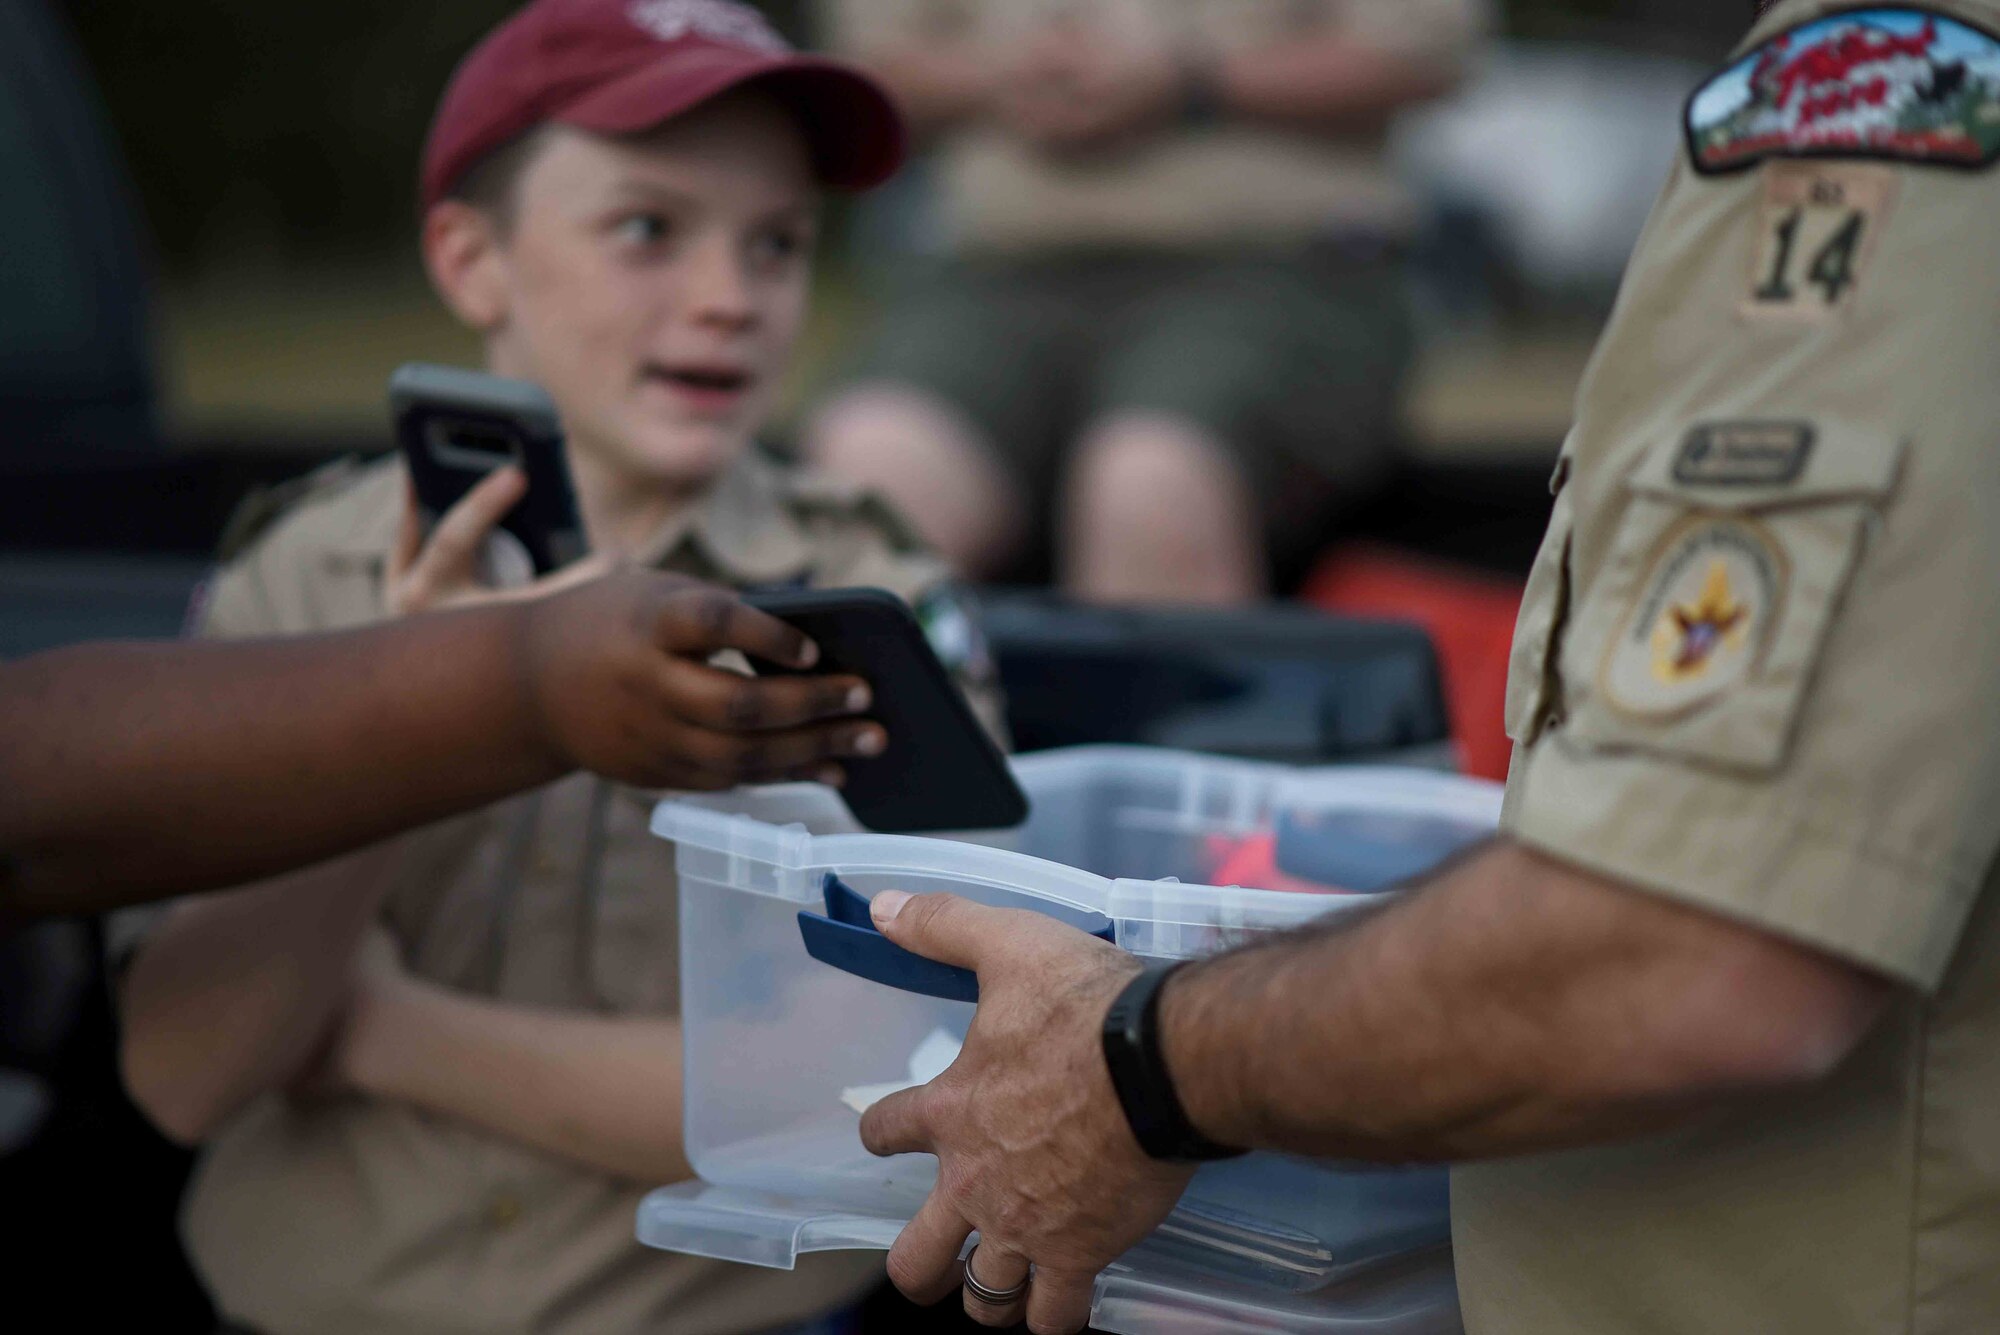 Scouts, Boy Scouts of America members give their phones to their troop leader March 29, 2019, on Columbus Air Force Base, Mississippi. Roughly 150 scouts were able to participate in the overnight camping event on Columbus AFB. (U.S. Air Force photo by Airman 1st Class Keith Holcomb)